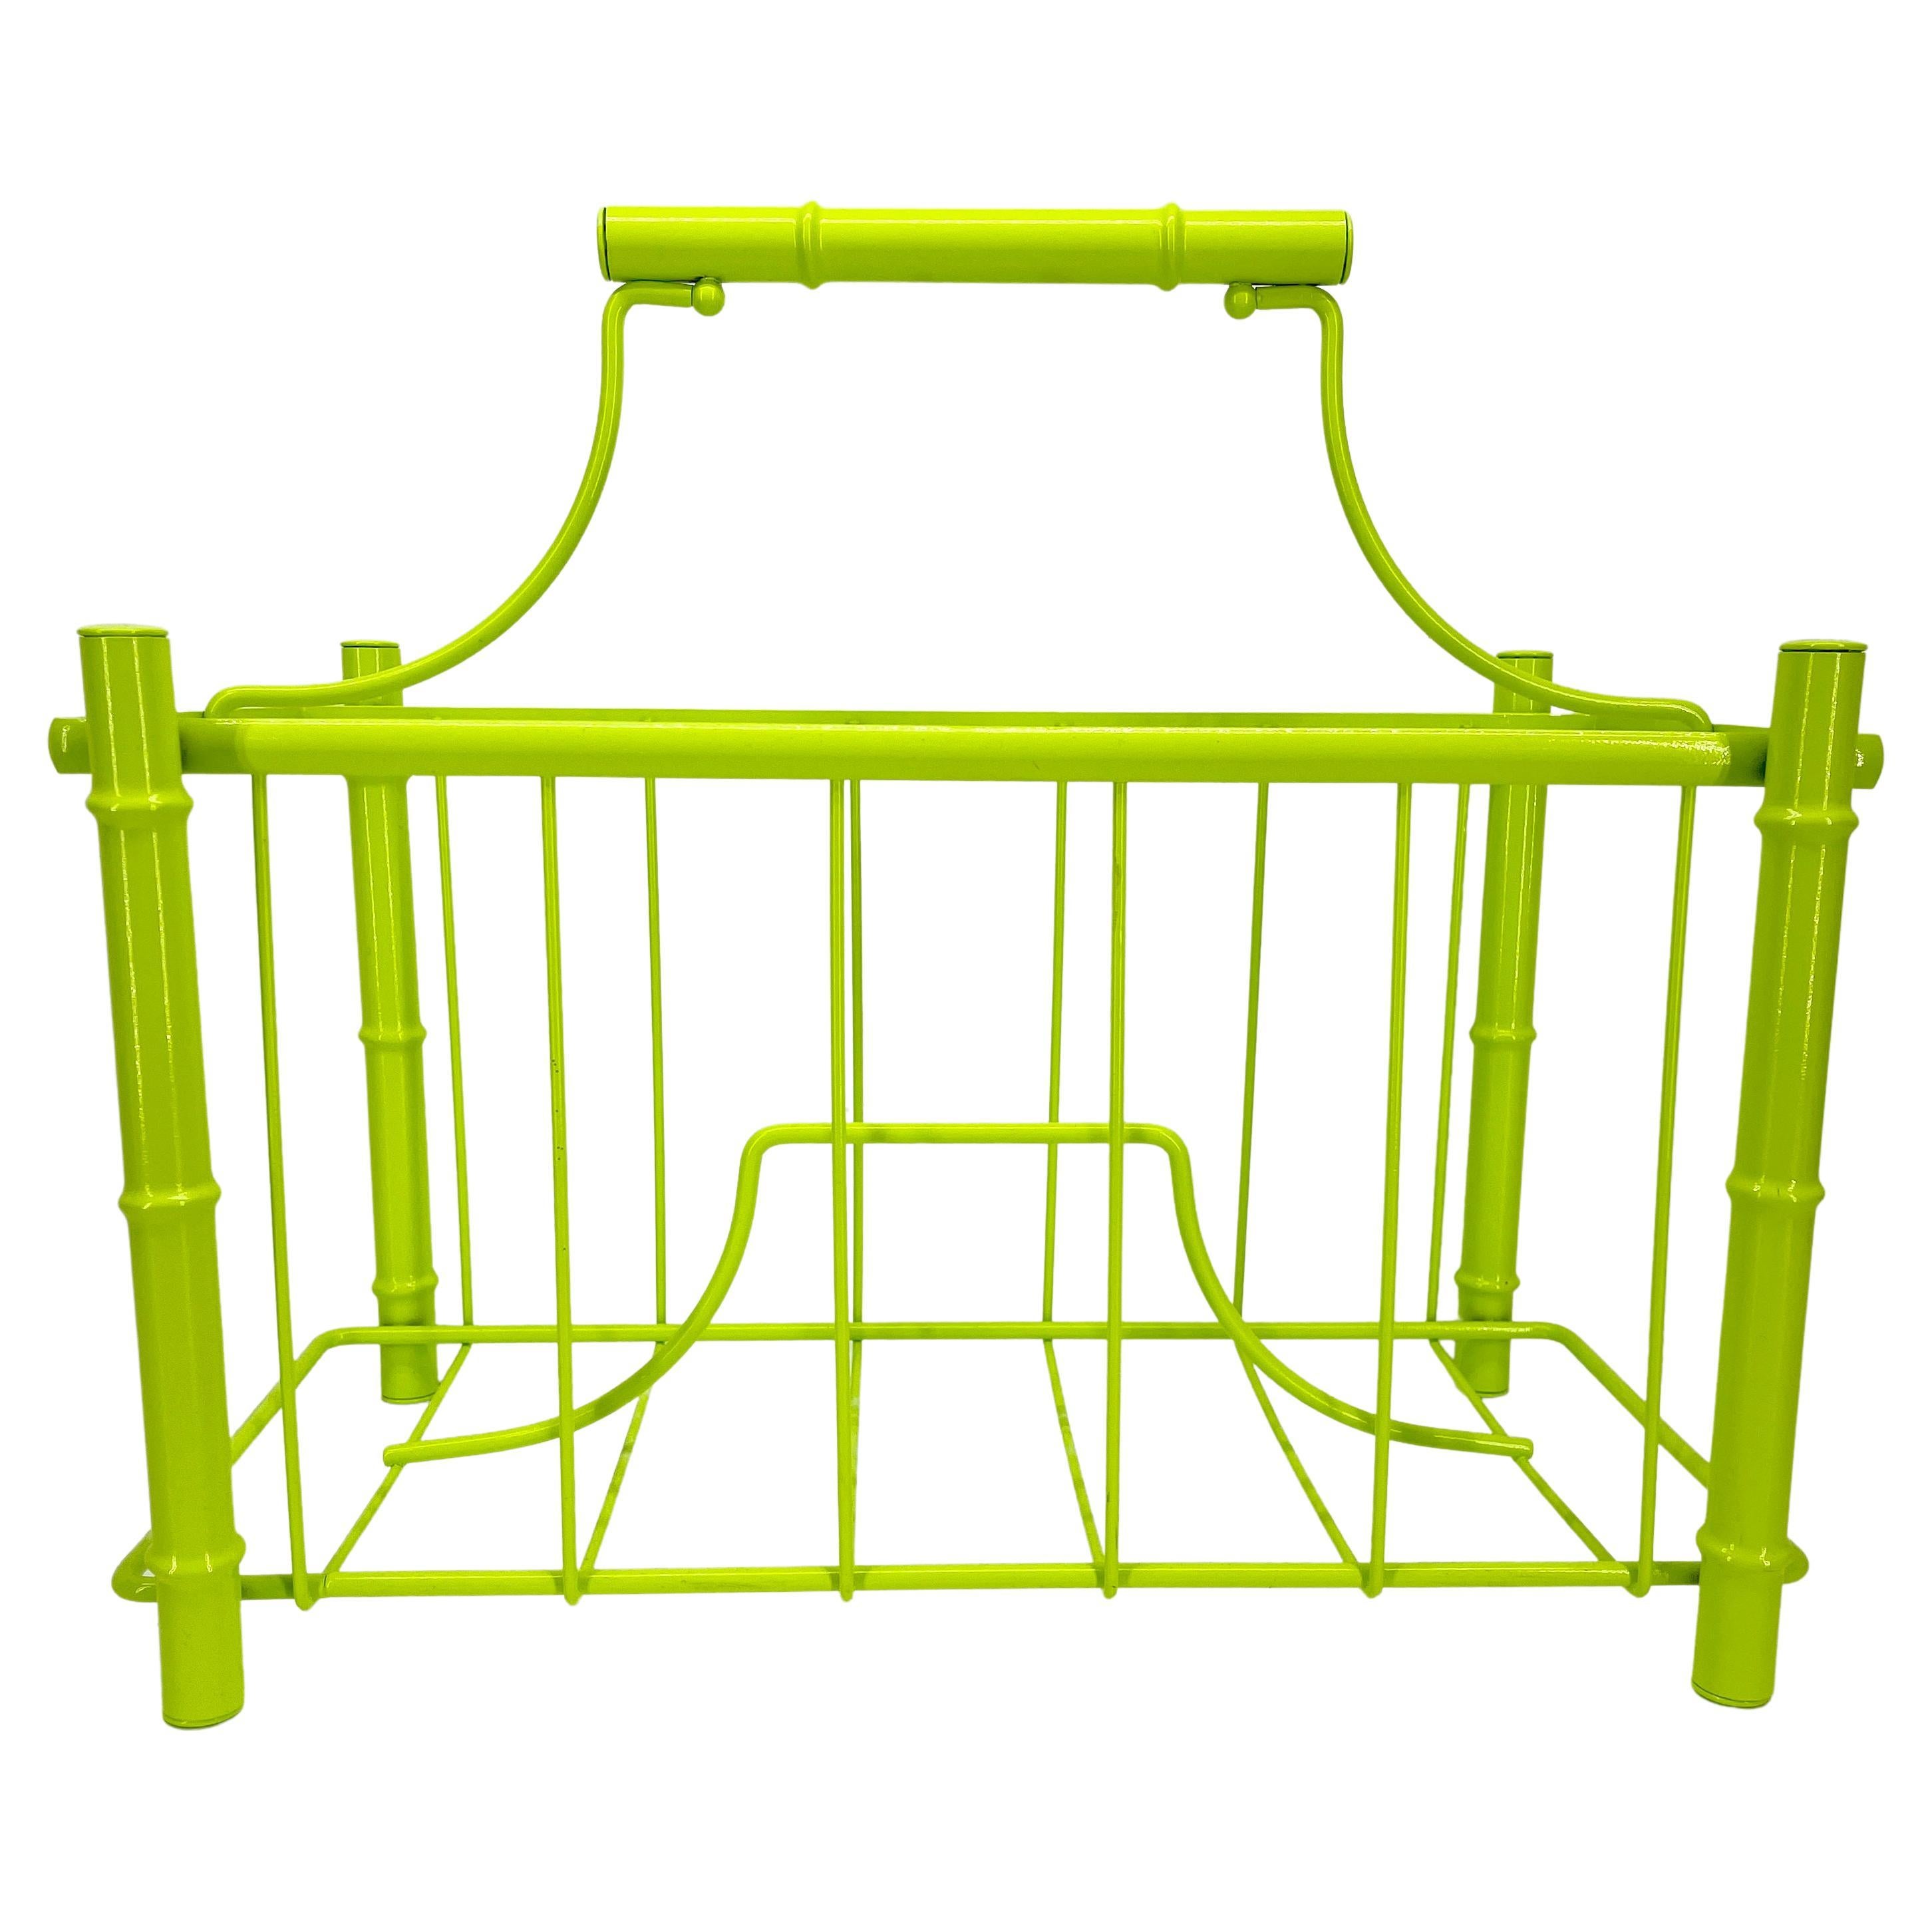 Powder-Coated Mid-Century Modern Faux Bamboo Magazine Rack, Powder Coated Bright Chartreuse For Sale